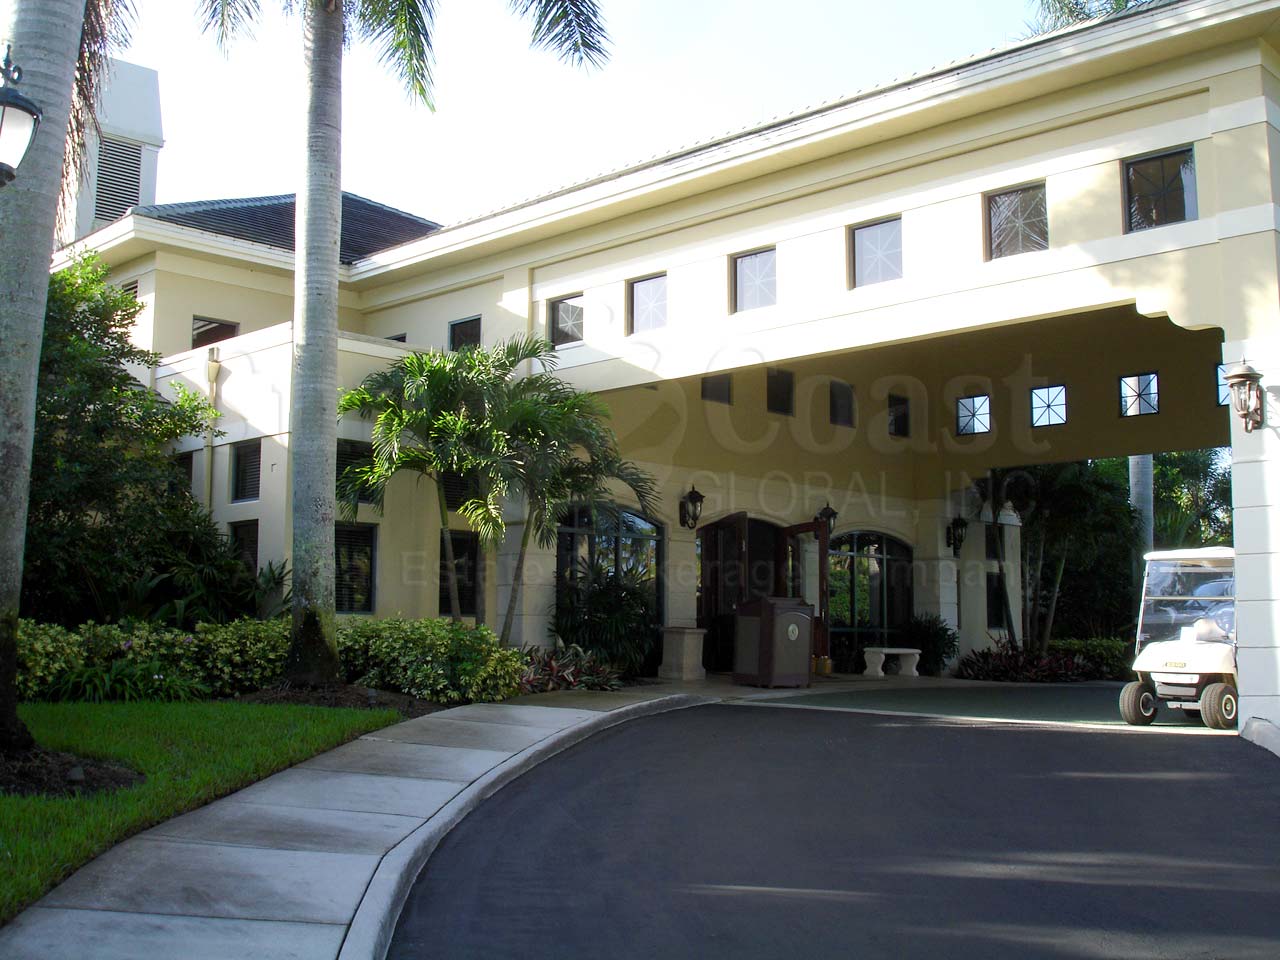 KENSINGTON Golf and Country Club entrance